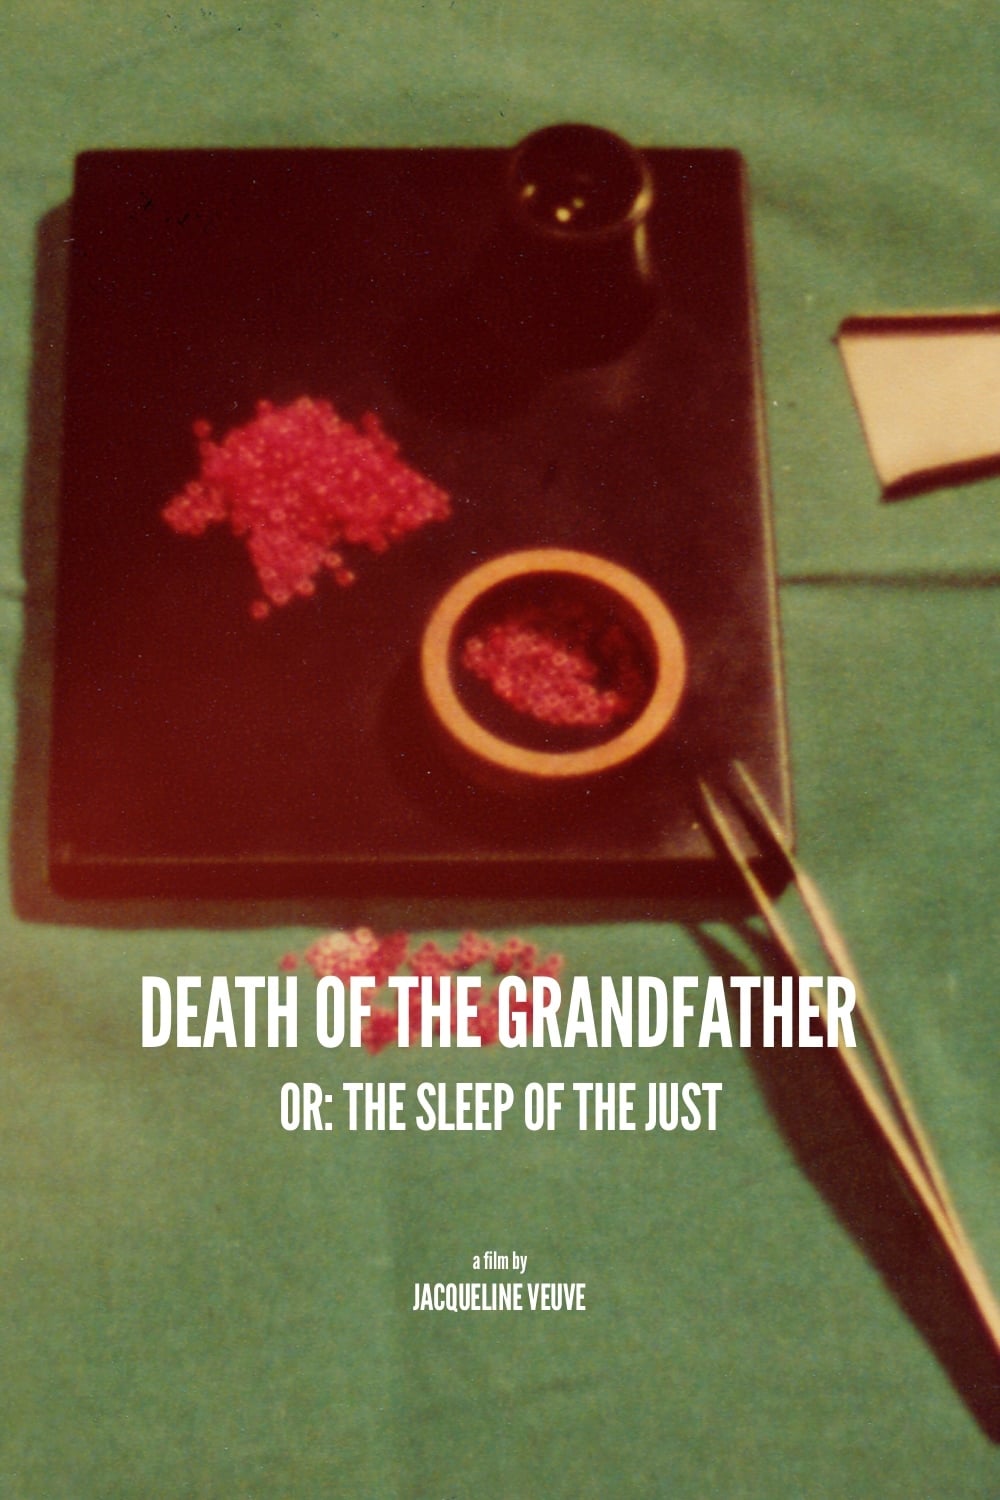 Death of the Grandfather or: The Sleep of the Just